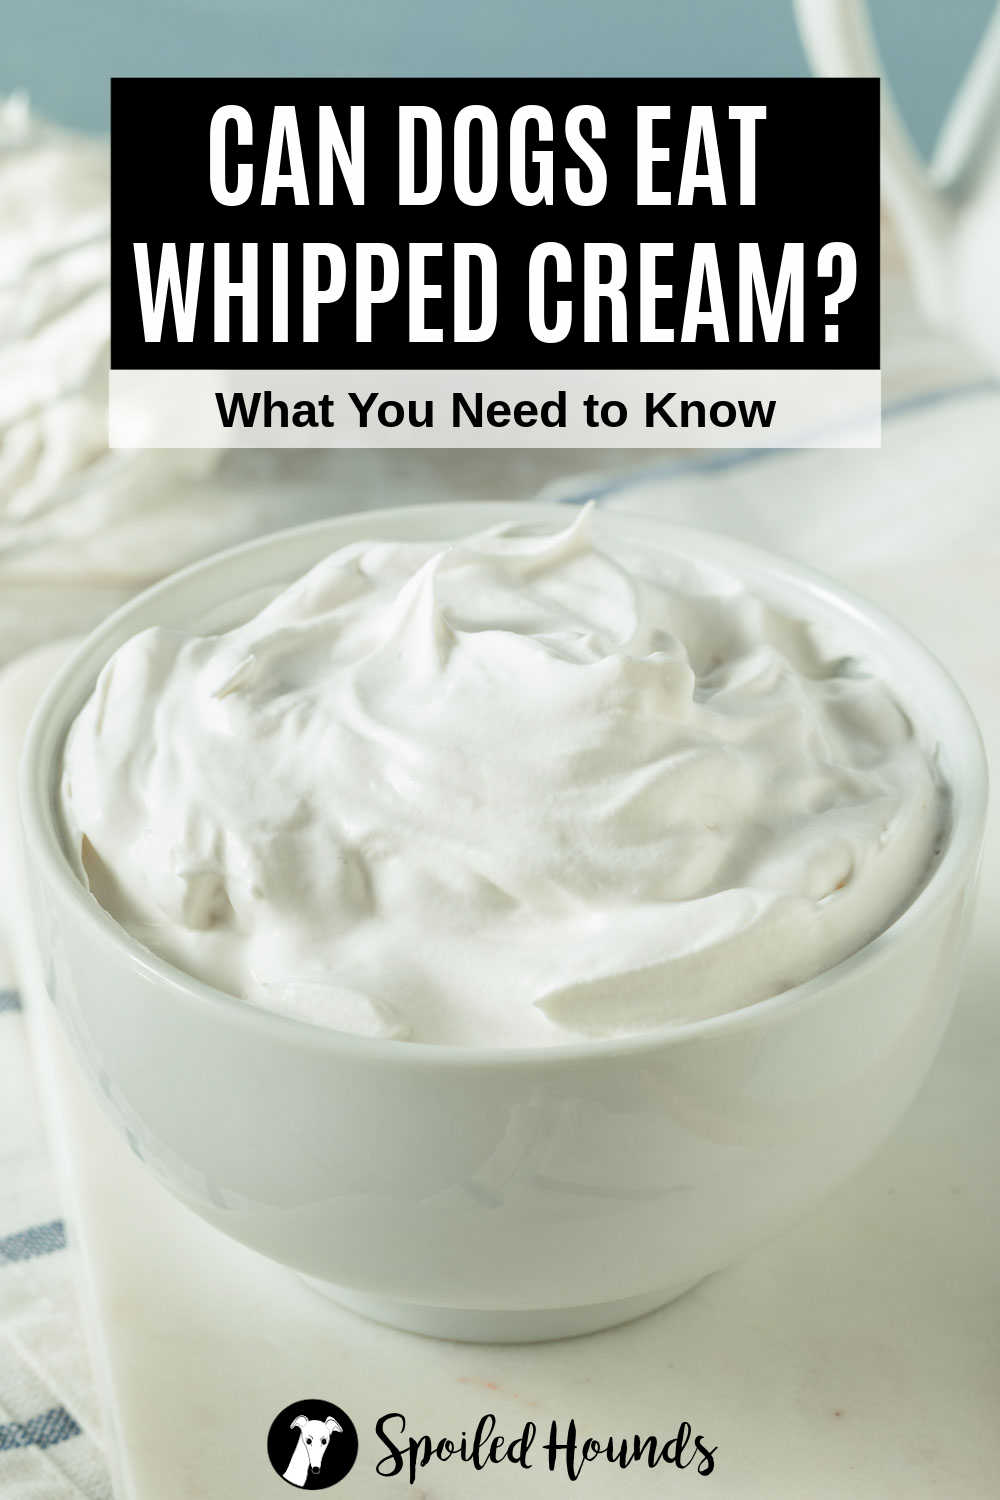 whipped cream in a bowl on a table